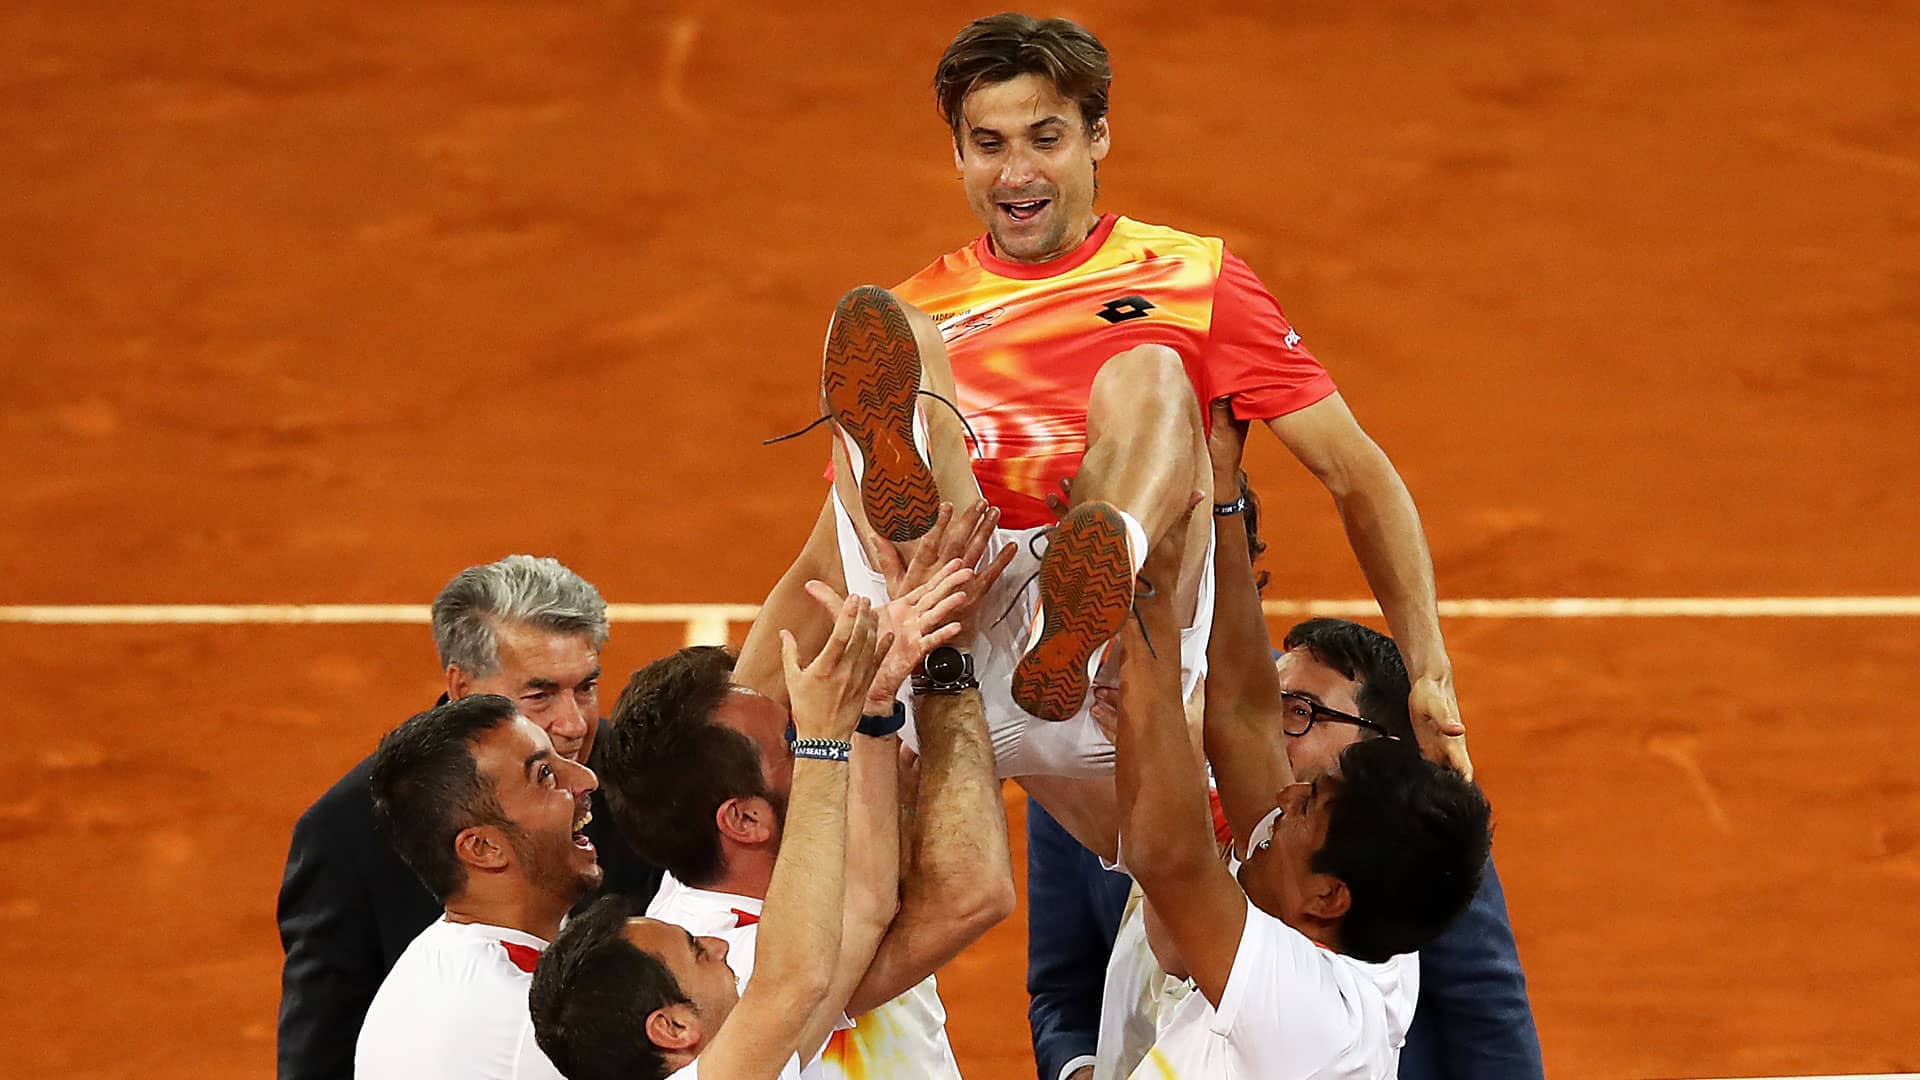 <a href='https://www.atptour.com/en/players/david-ferrer/f401/overview'>David Ferrer</a> reacts during his retirement ceremony in Madrid.